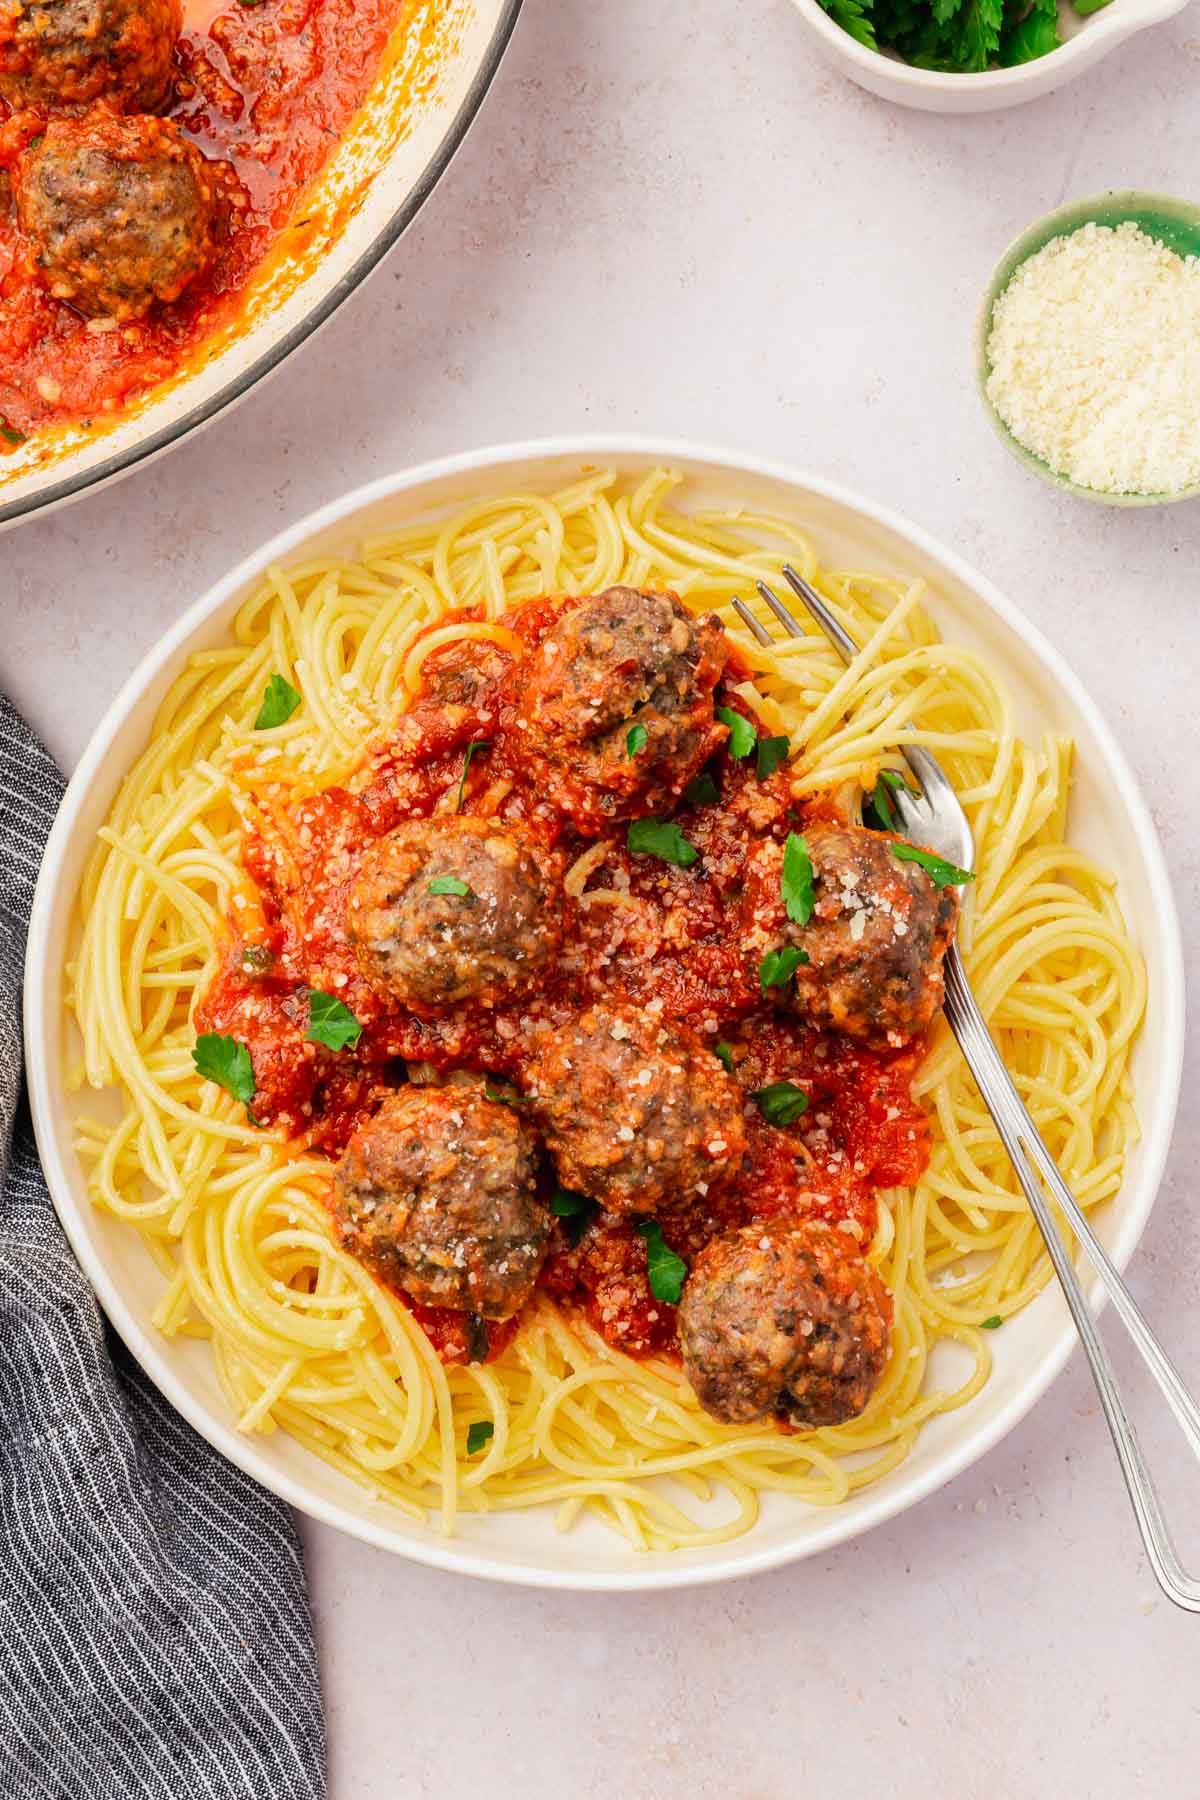 An overhead view of a bowl of gluten-free spaghetti topped with six gluten-free meatballs, marinara sauce and fresh parsley with a fork in the spaghetti.